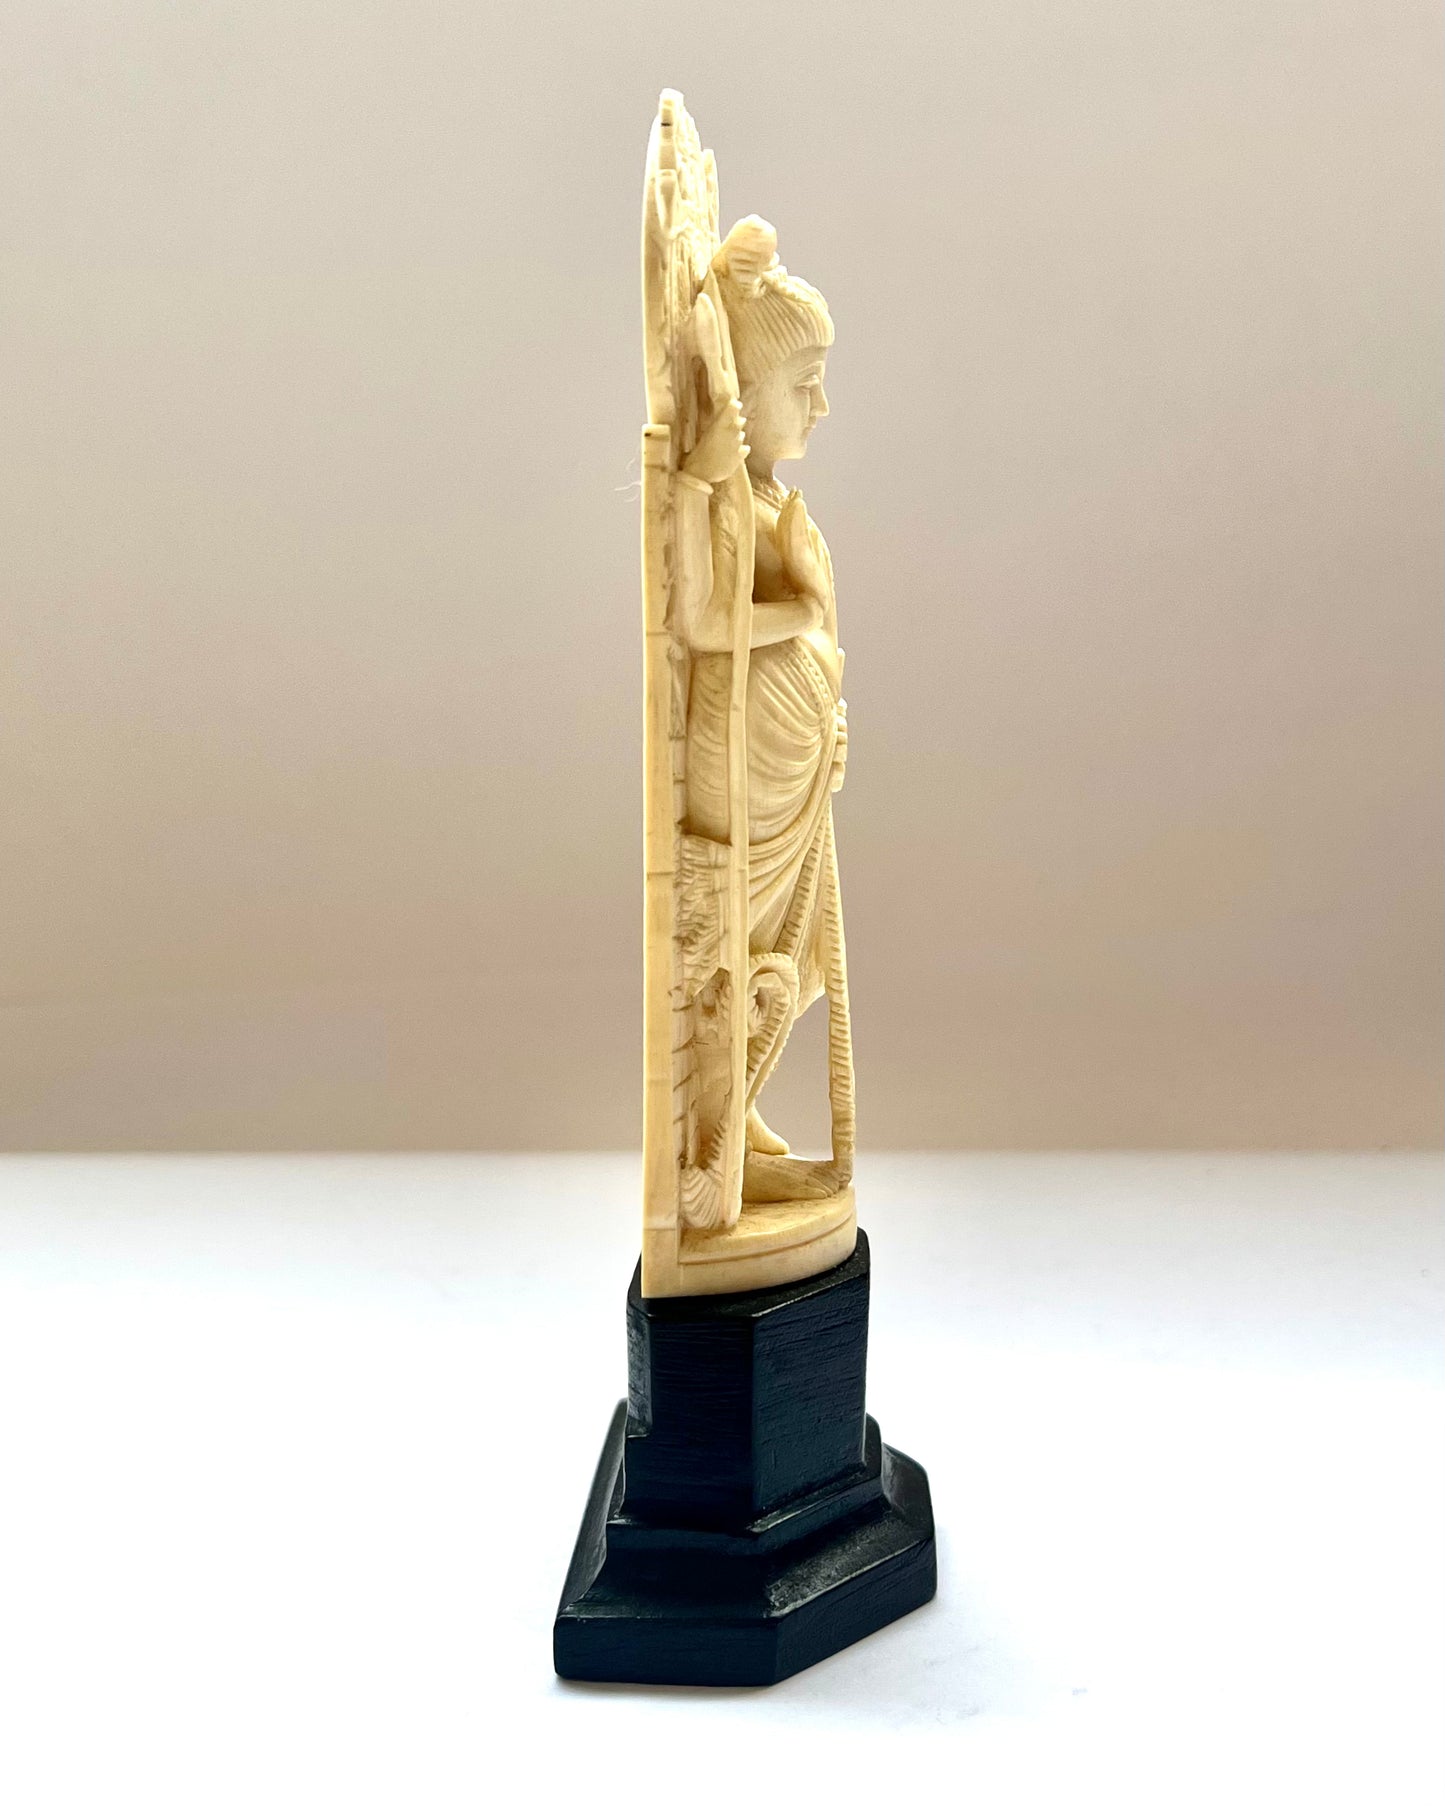 19th century Indian ivory carving depicting the goddess Lakshmi